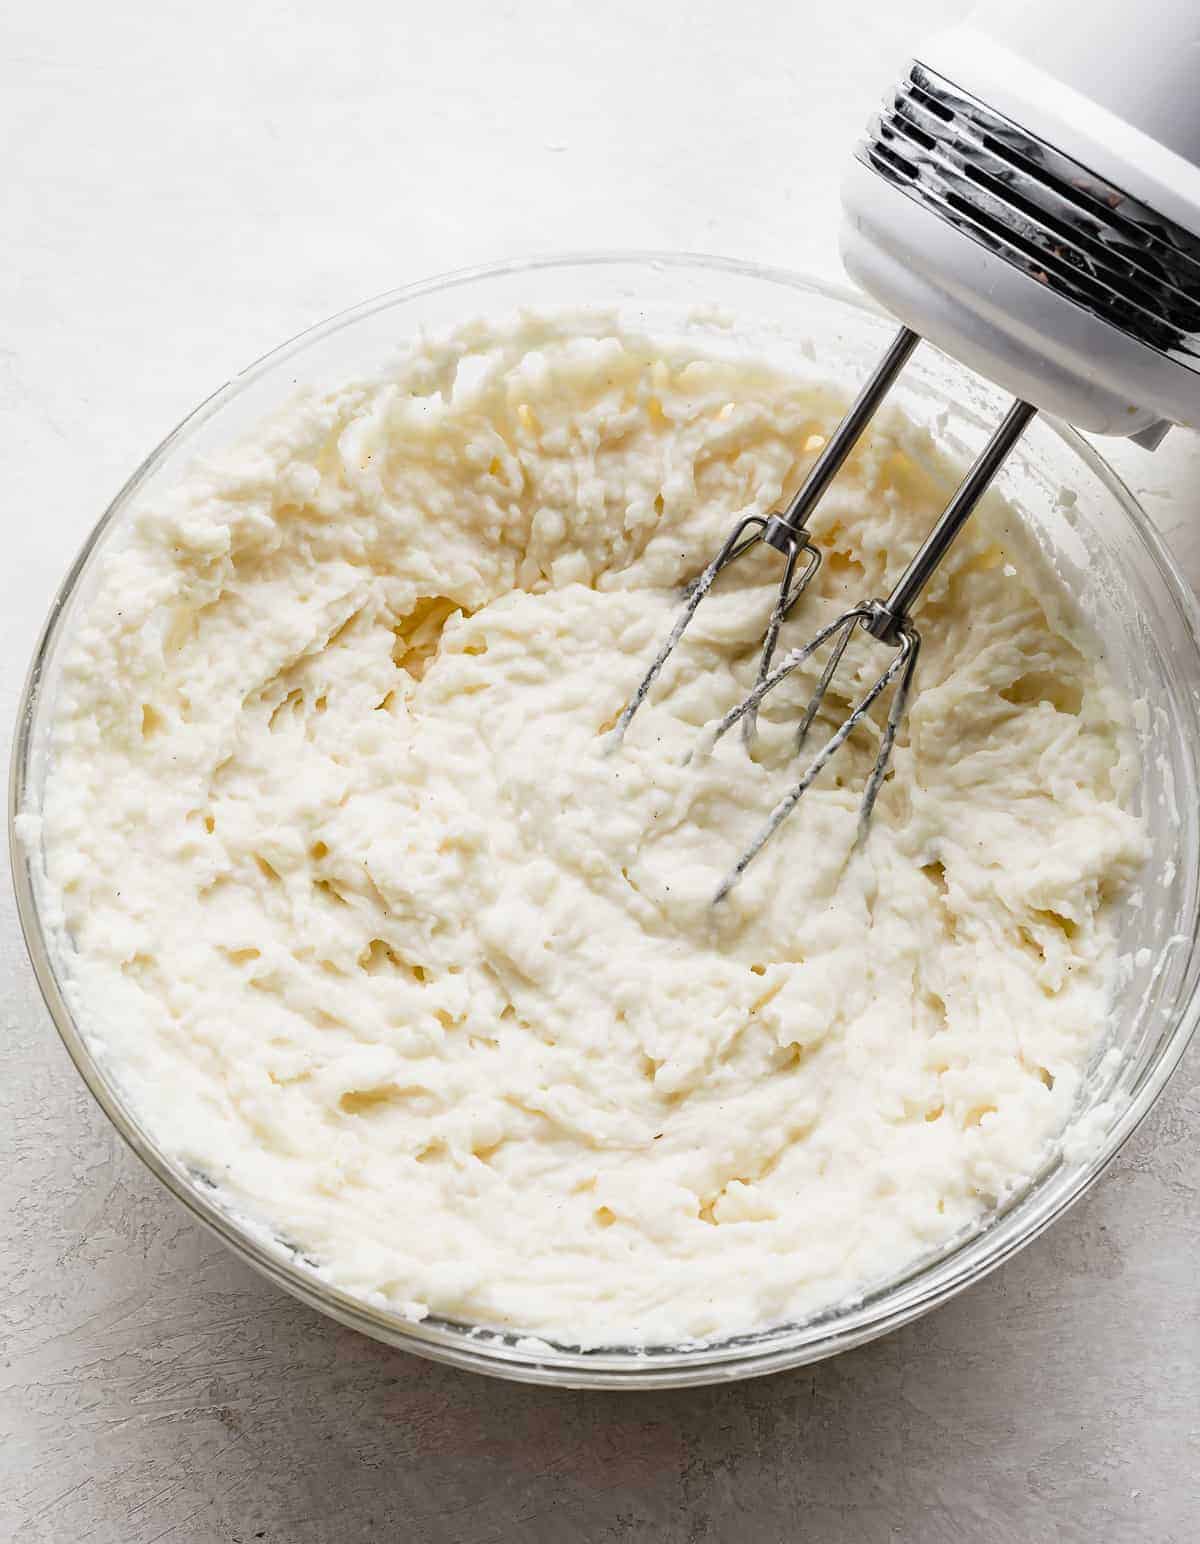 A hand mixer beating the Twice Baked Potatoes with Cream Cheese mixture in a glass bowl.